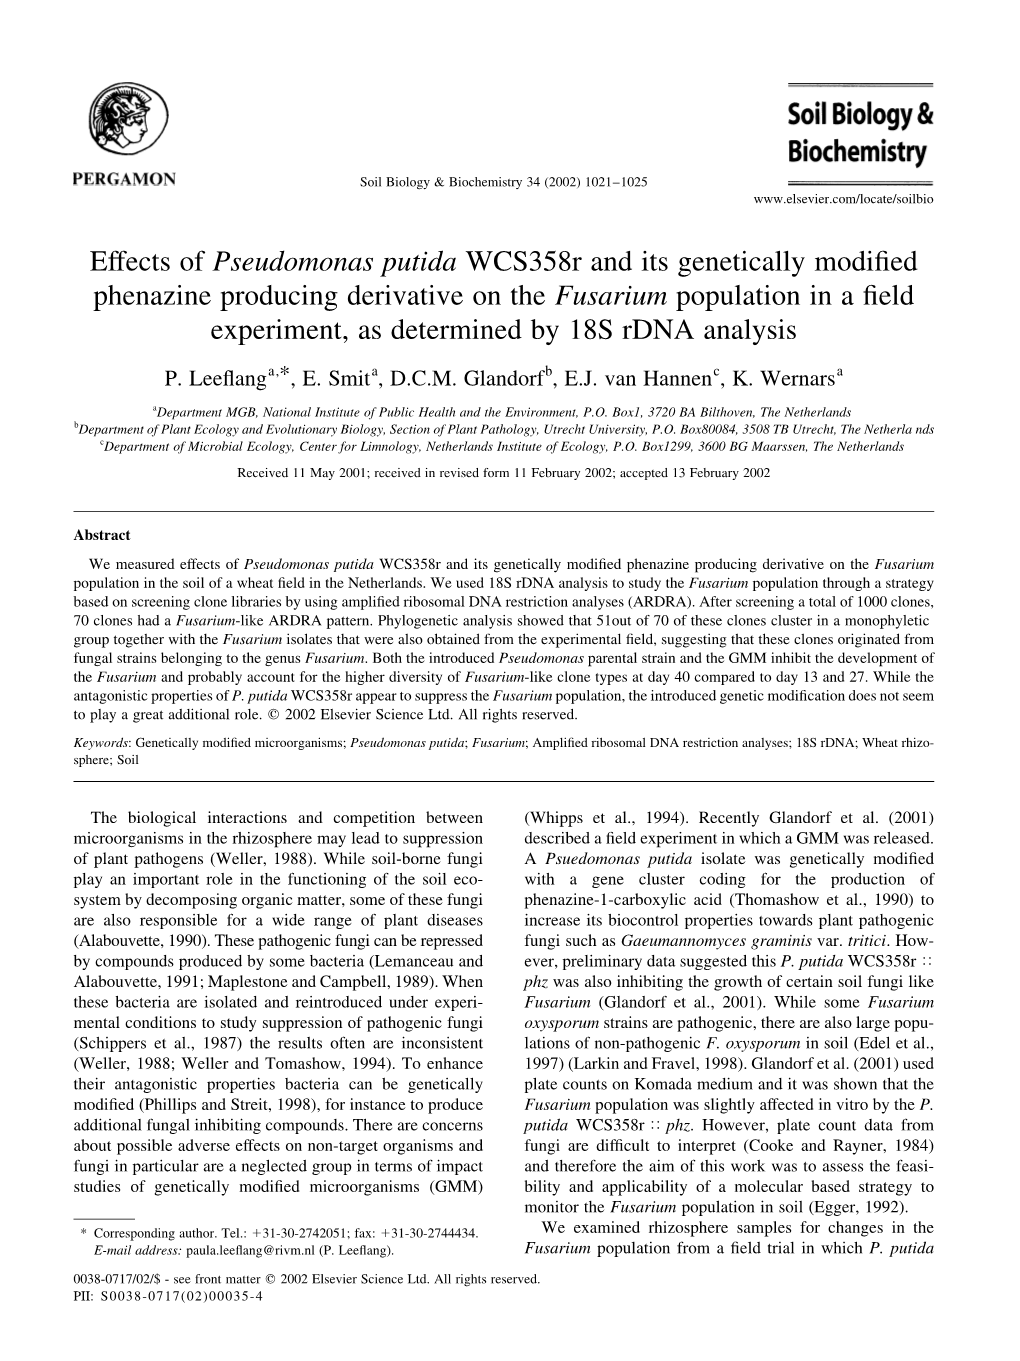 Effects of Pseudomonas Putida Wcs358r and Its Genetically